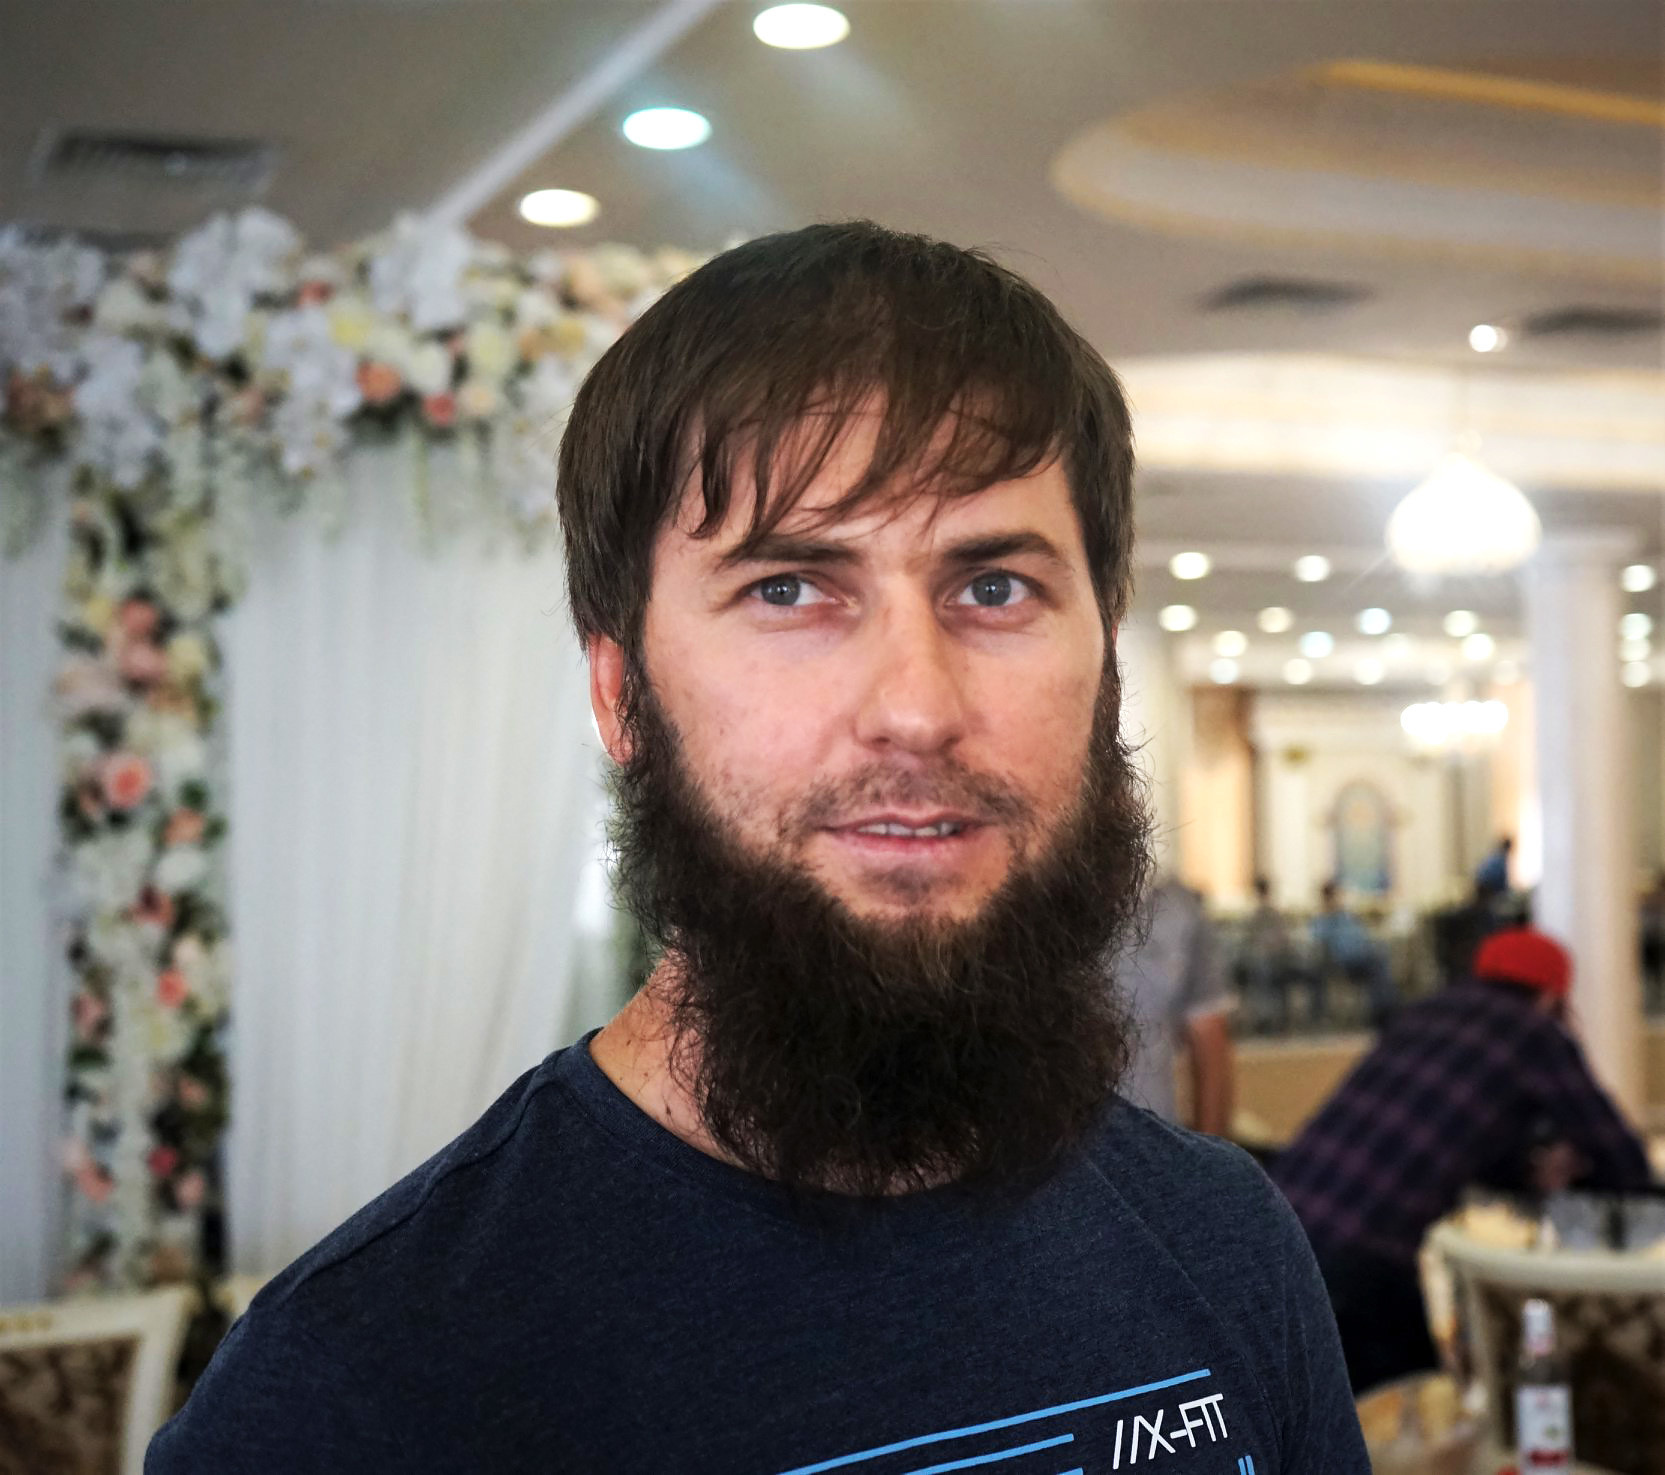 Abubaker from Grozny remembers both Chechen wars - especially hiding in cellars with his family. One of his cousins died when playing with UXO. Another relative was killed in the shelling. According to him, 